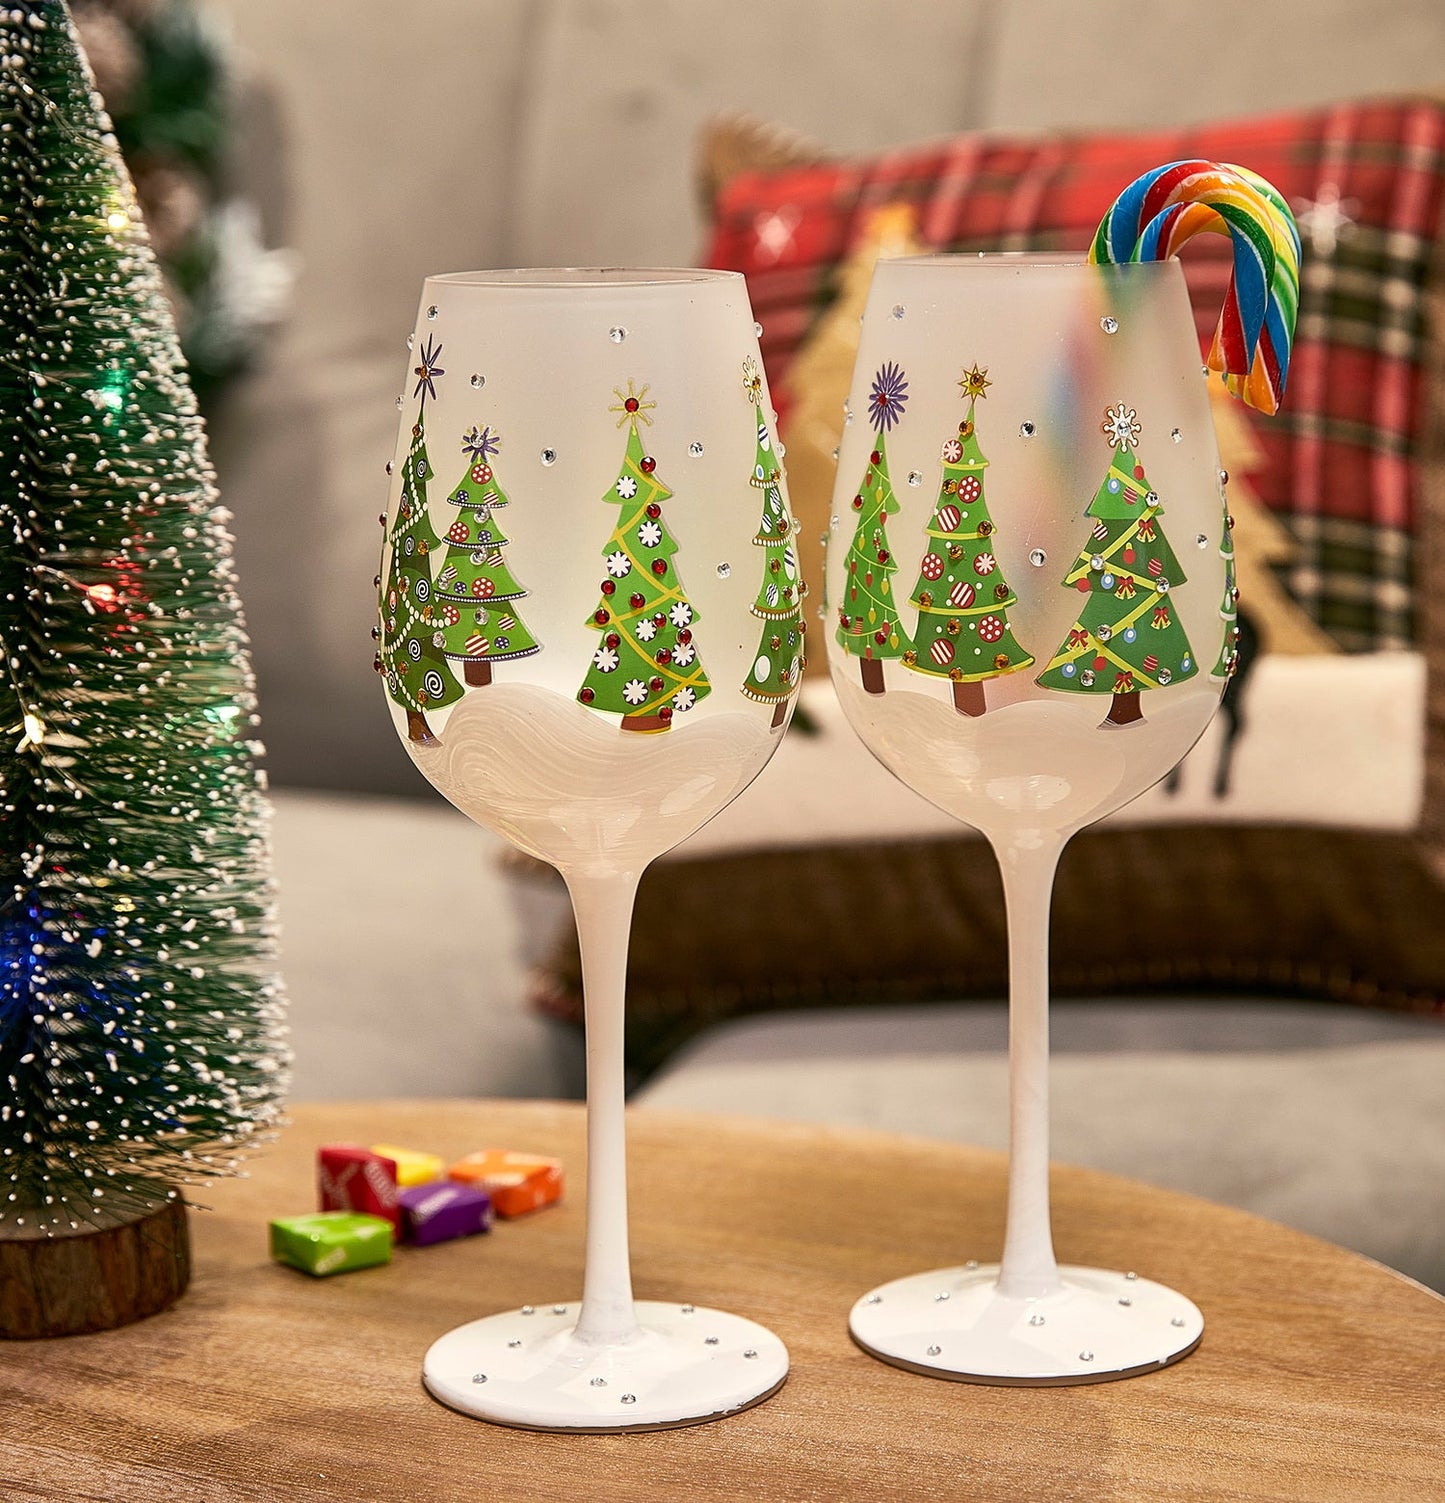 Set of 2 Stemmed Christmas Tree Design Wine Glasses - Hand Painted 14 oz Decorated Christmas Tree Glasses - Perfect for Wine, Champagne, Holiday Parties and Festivities - 8.75" High, 14 oz Capacity-0